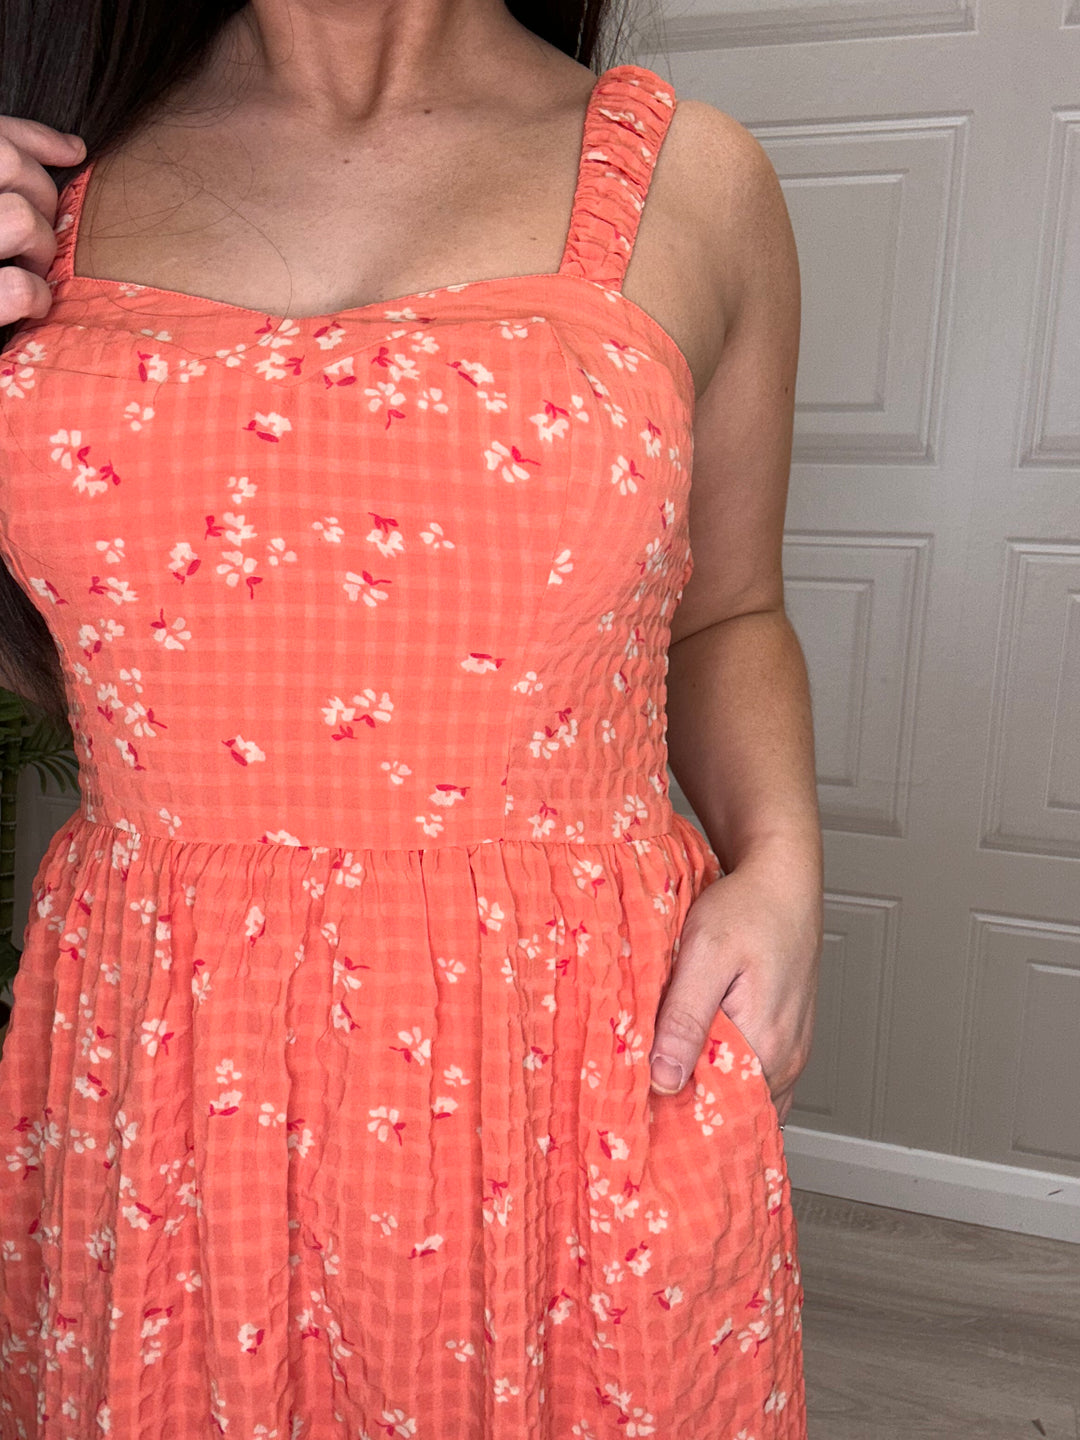 French Connection Erin Gretta Coral Flower Dress